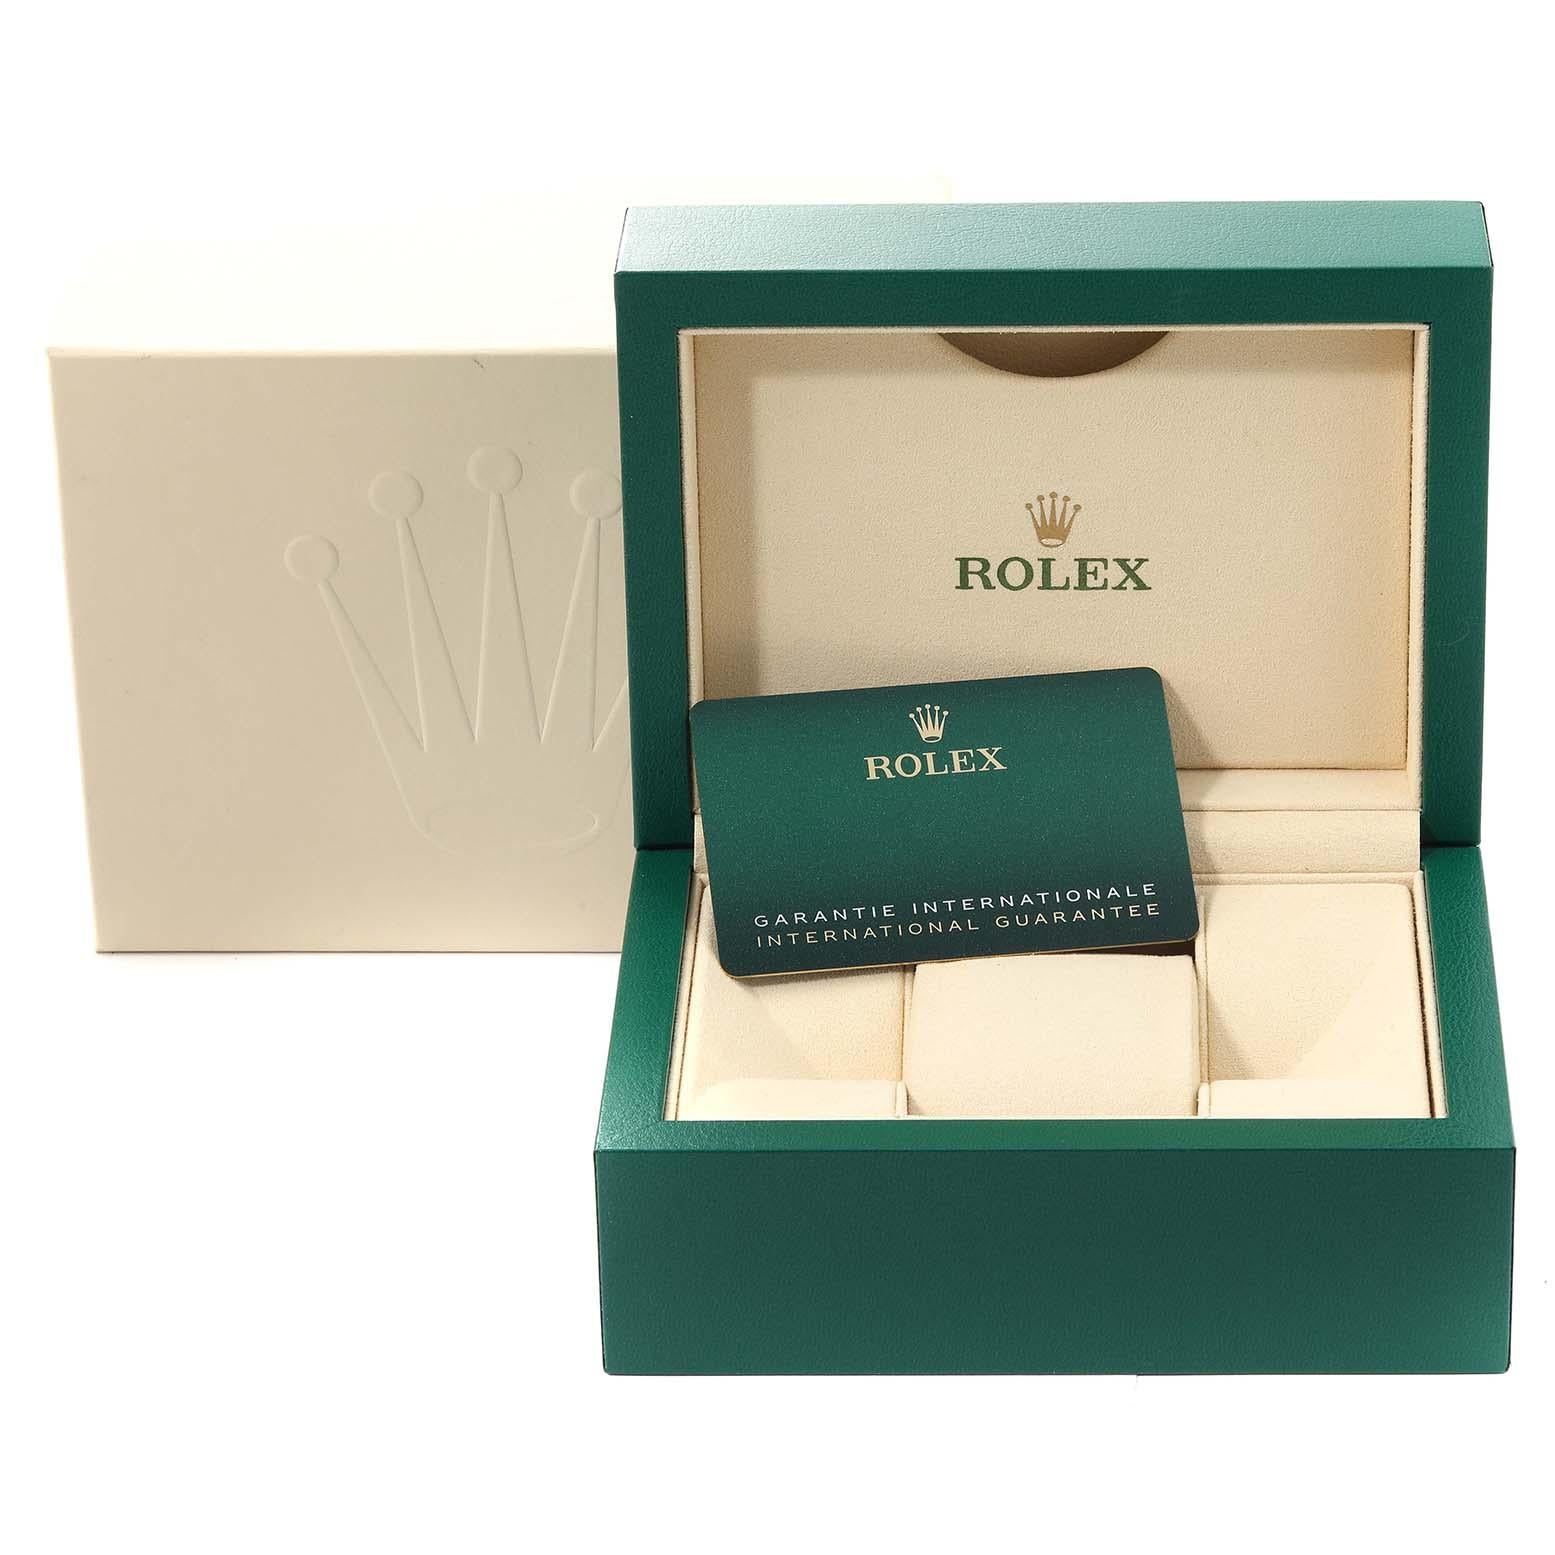 Rolex Oyster Perpetual Air King Green Hand Steel Mens Watch 116900 Box Card 6